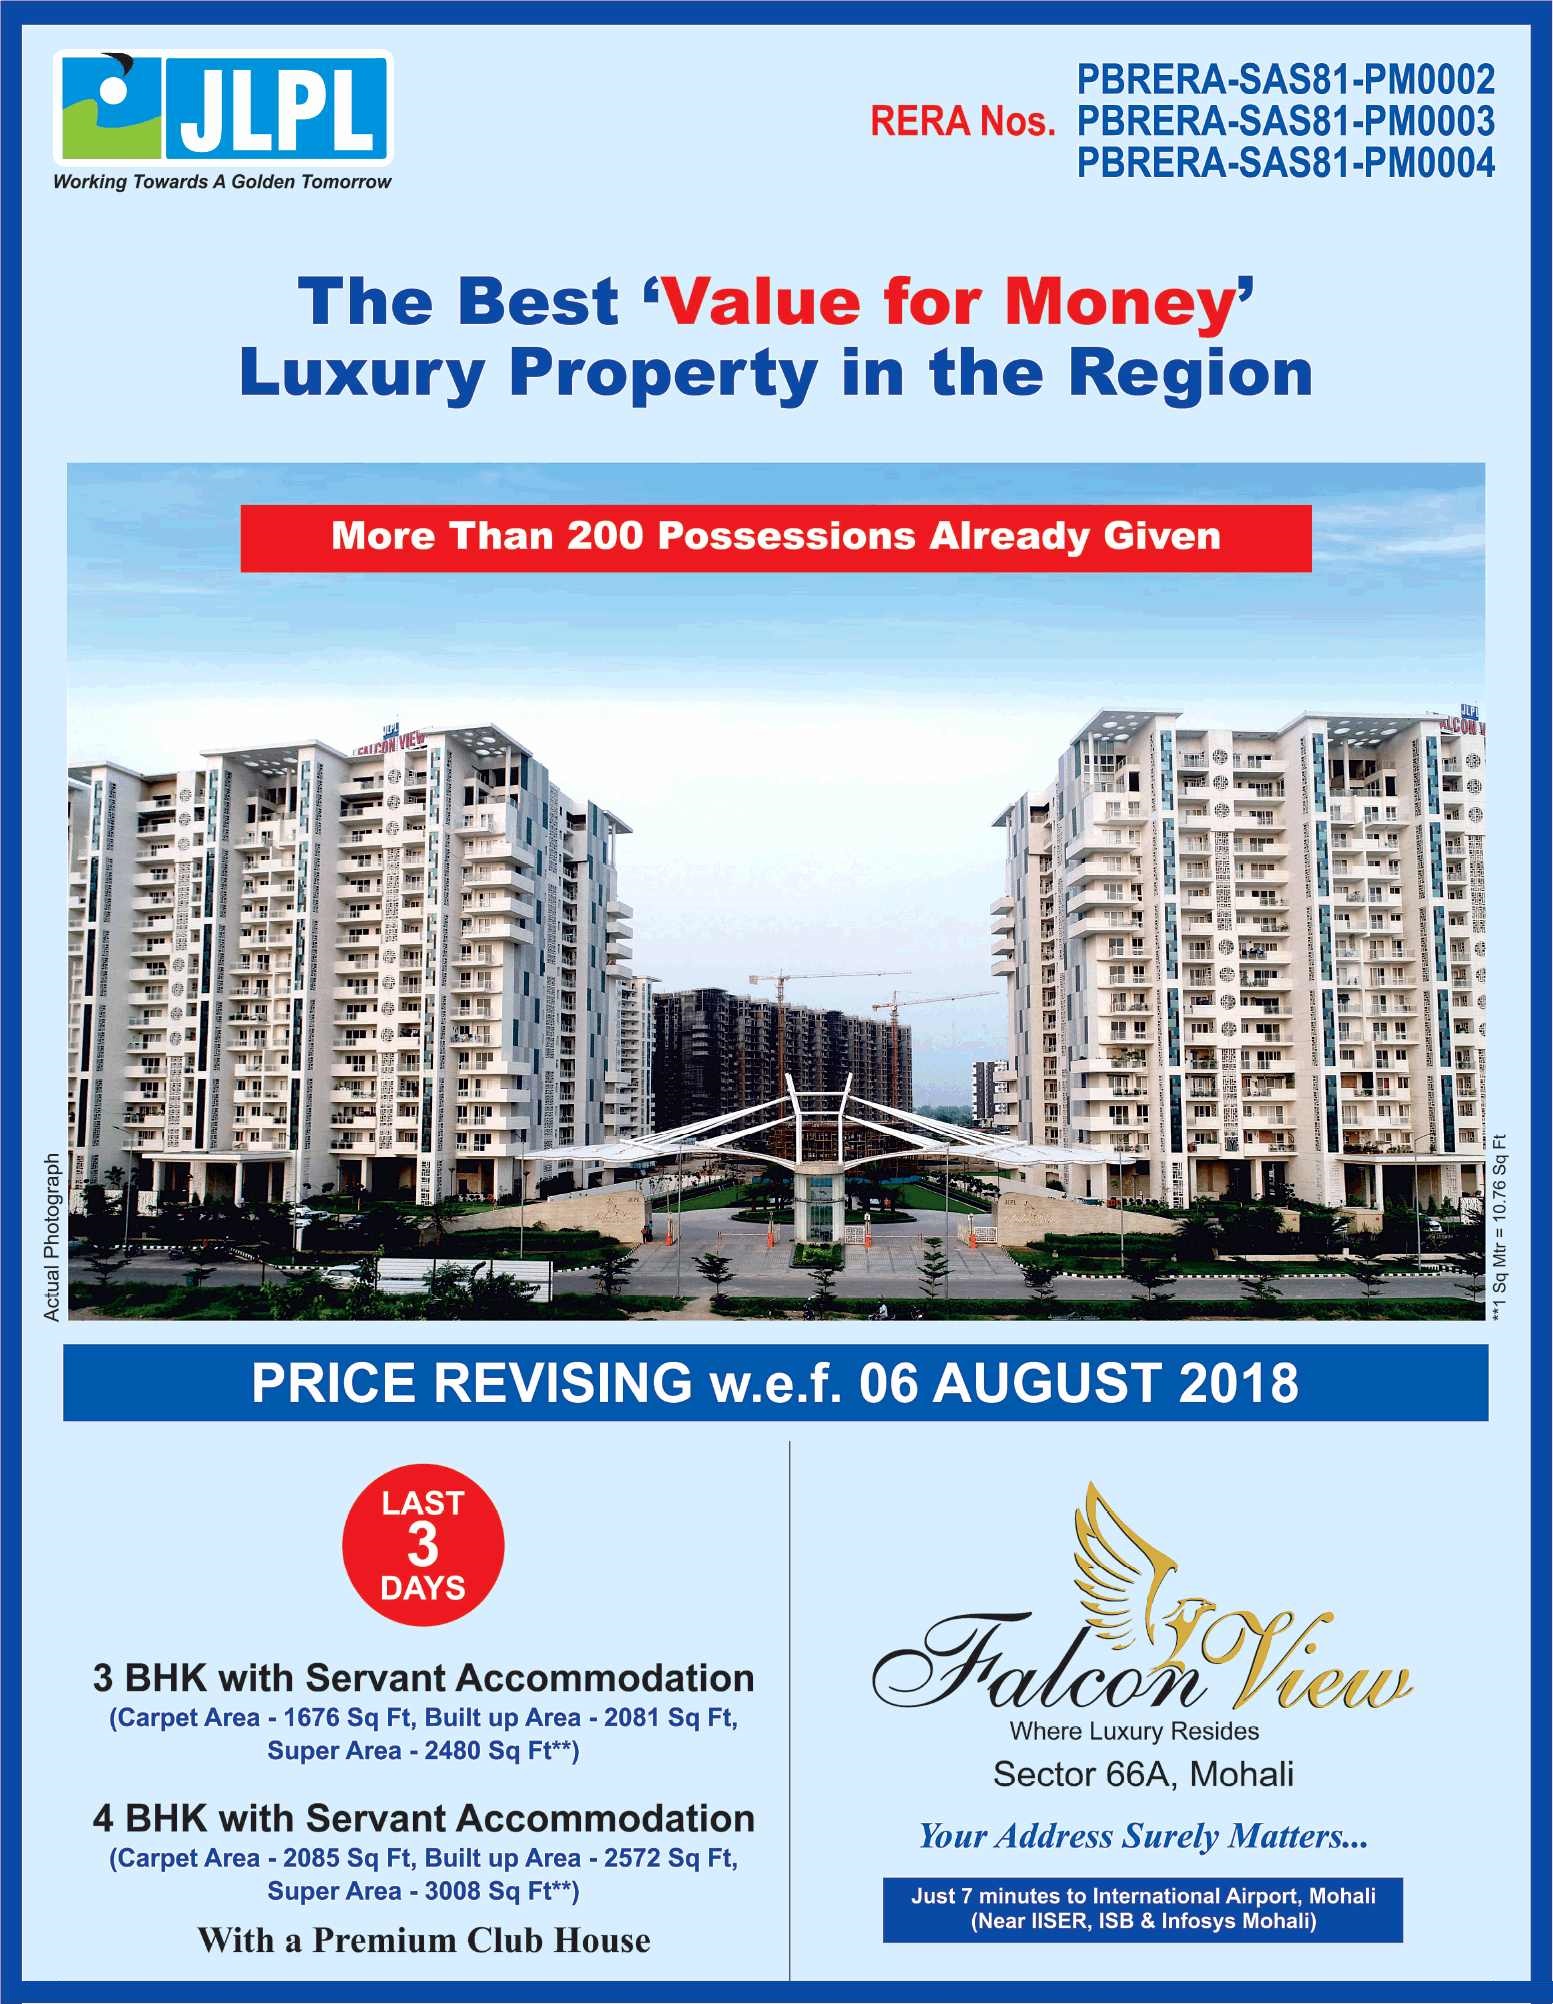 Book luxury property in the region at JLPL Falcon View in Mohali